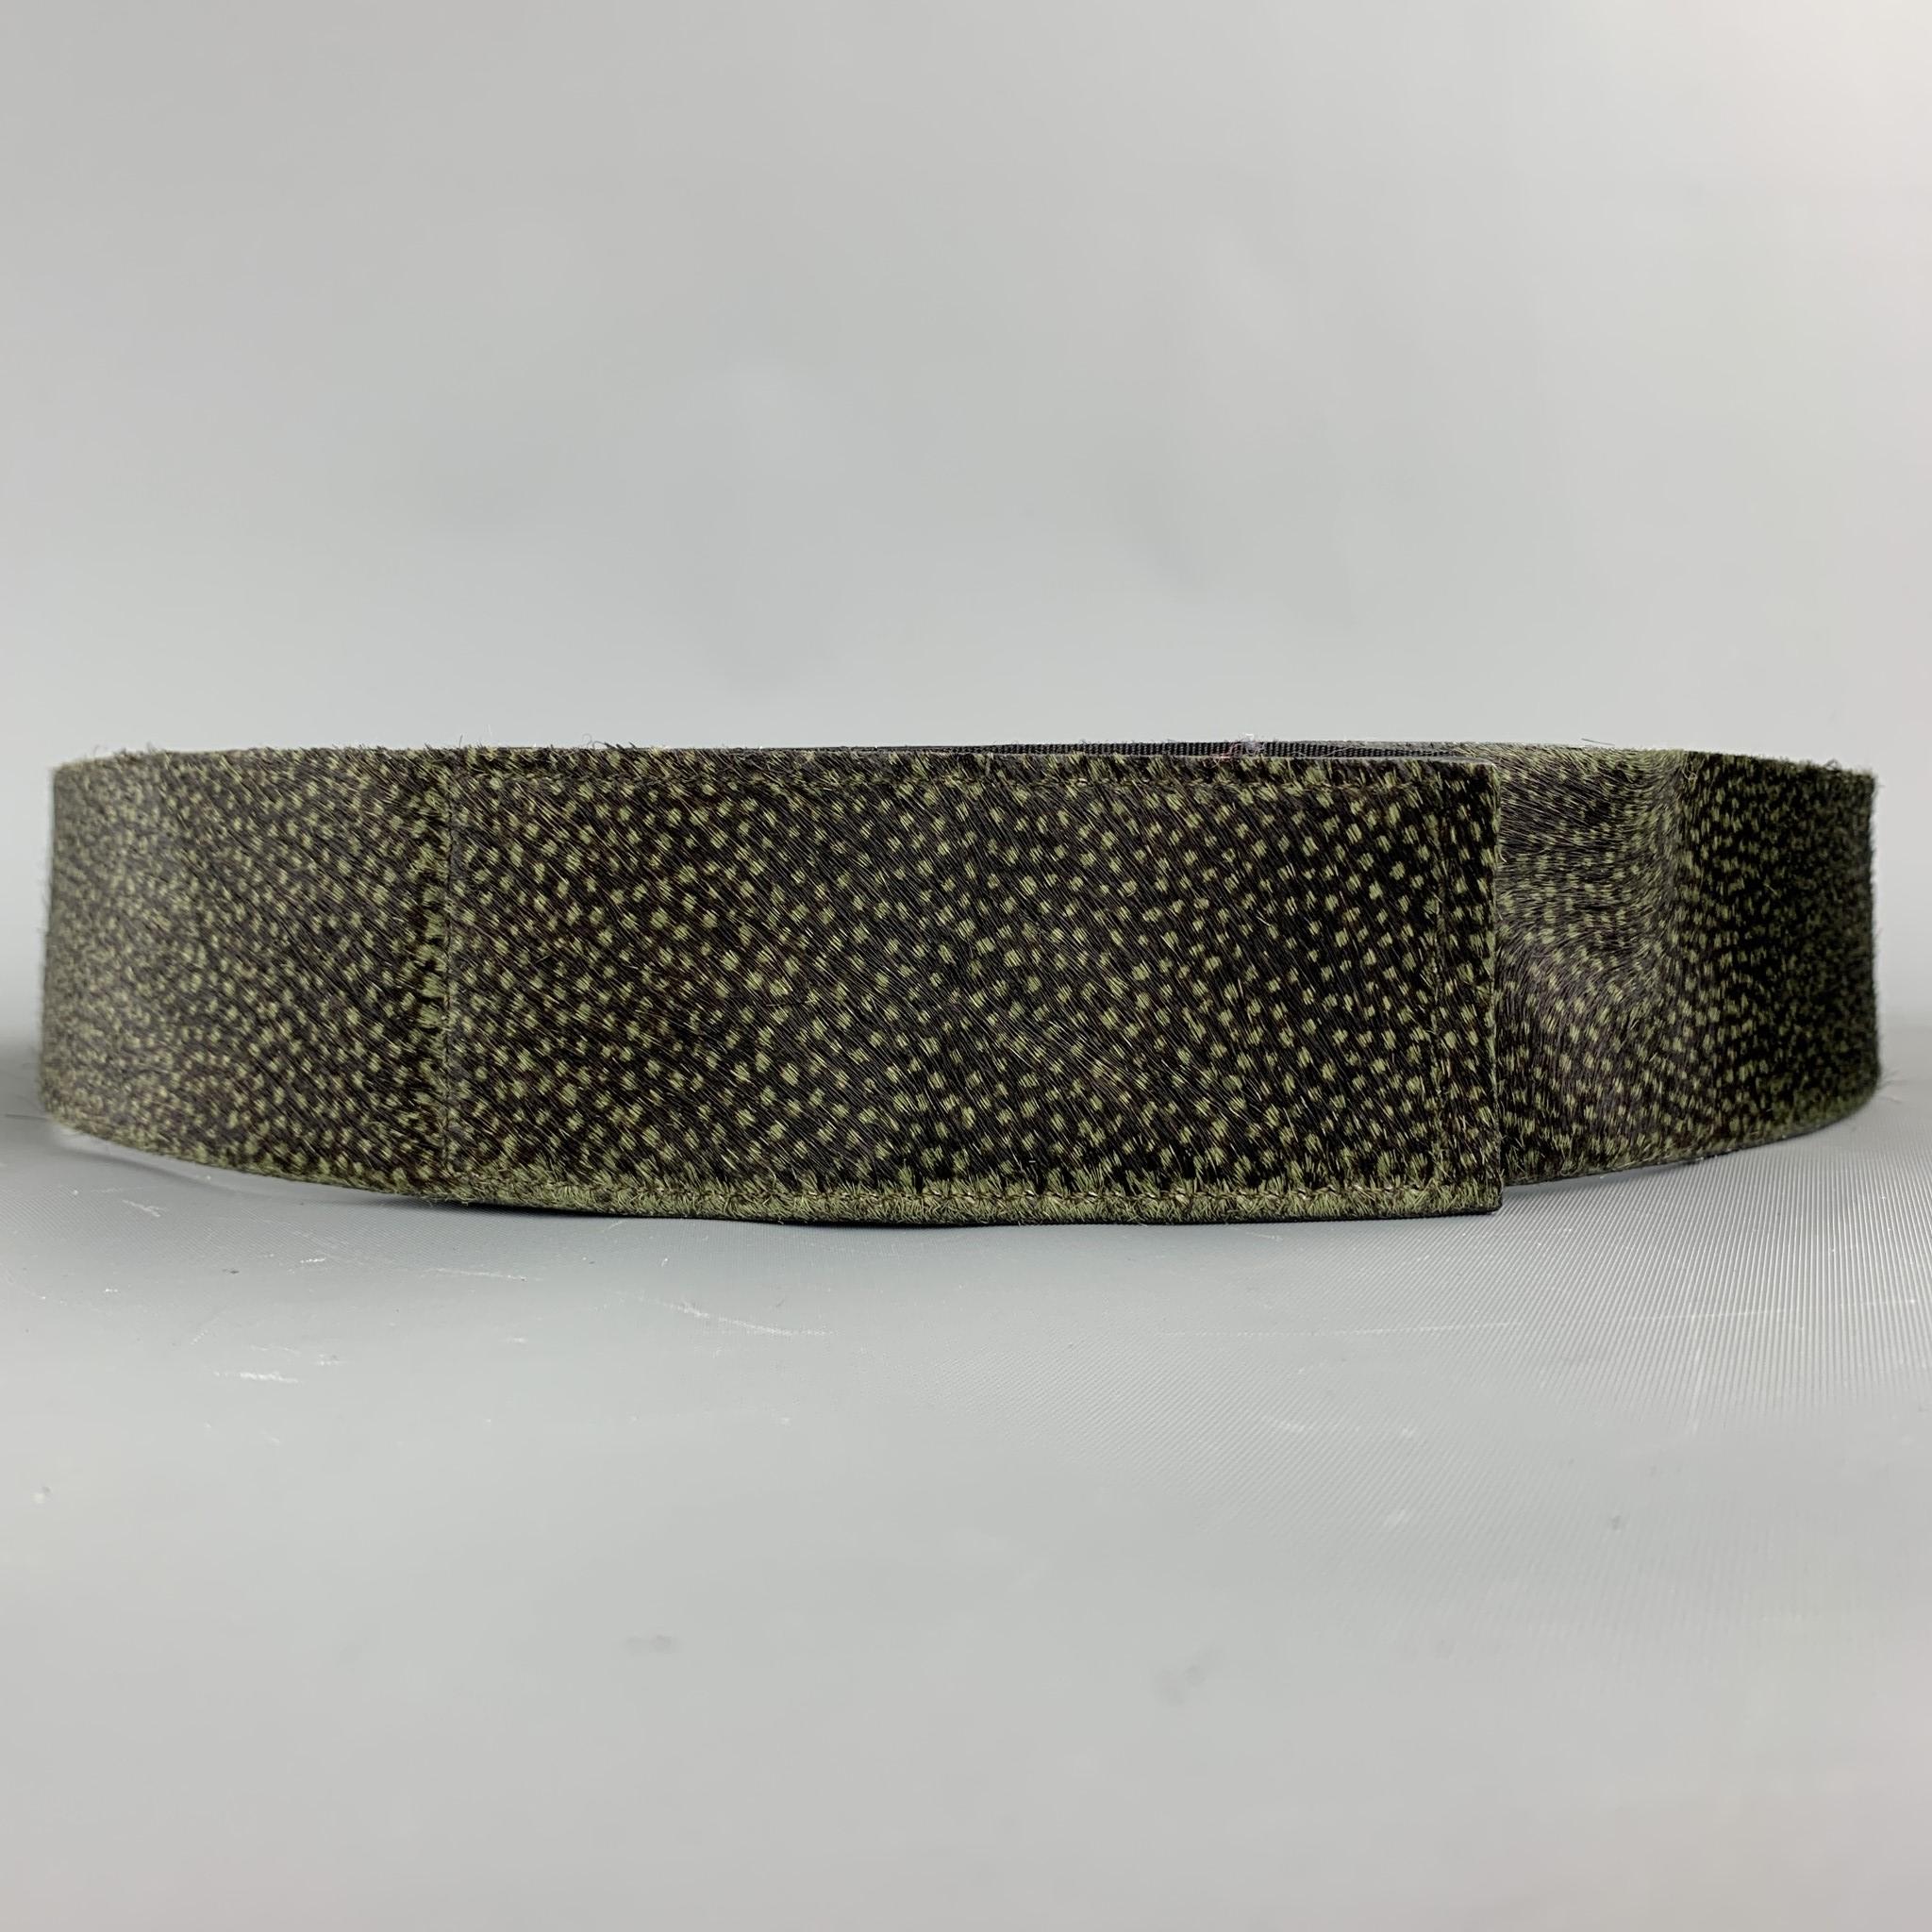 DRIES VAN NOTEN belt comes in a brown & green dot print calf hair featuring a velcro closure. Made in Italy.

Very Good Pre-Owned Condition.
Marked: 85

Length: 38.5 in. 
Width: 2 in. 